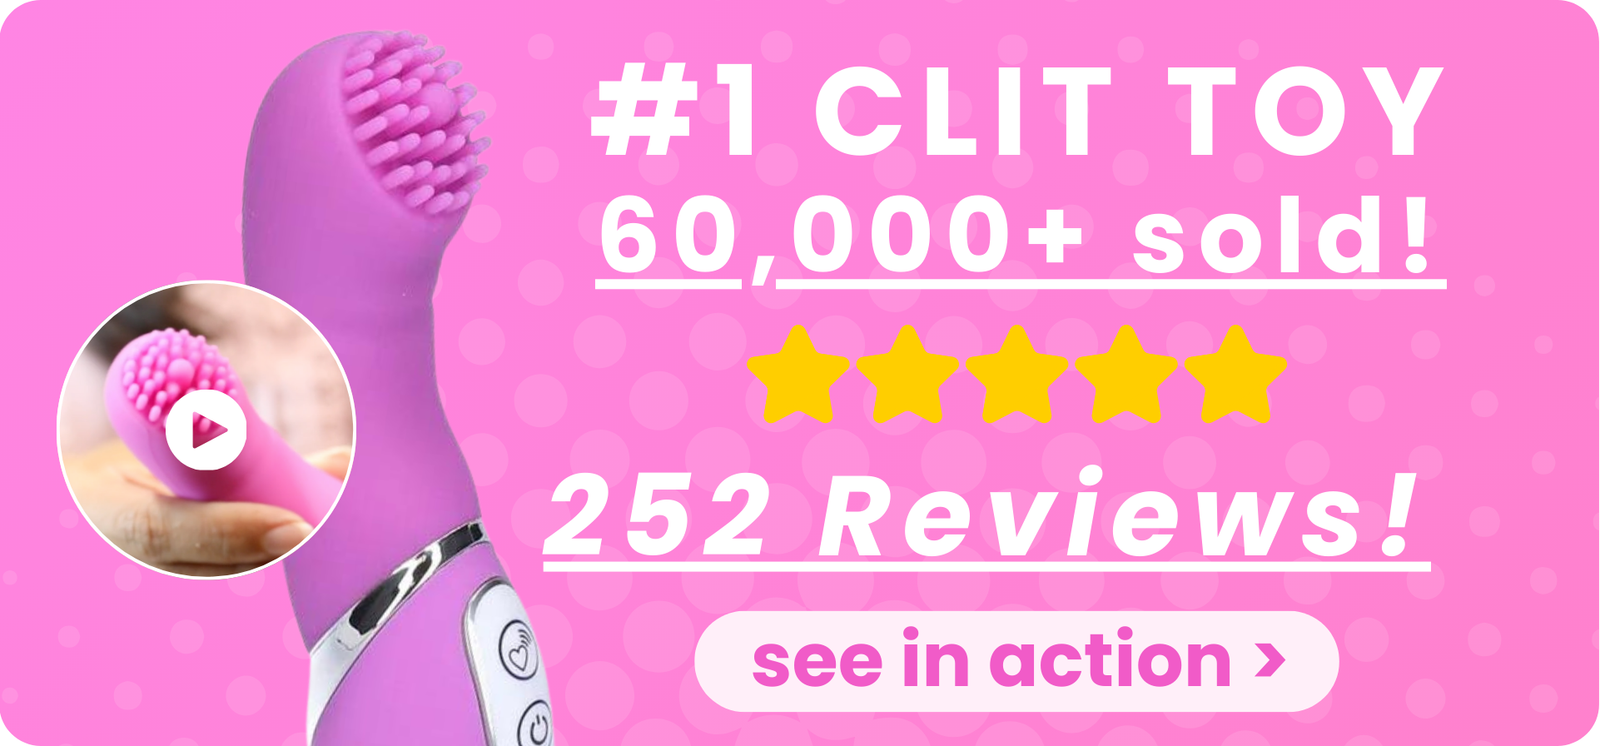 See our #1 clit toy in action! We've sold  60K and it has 252 reviews.